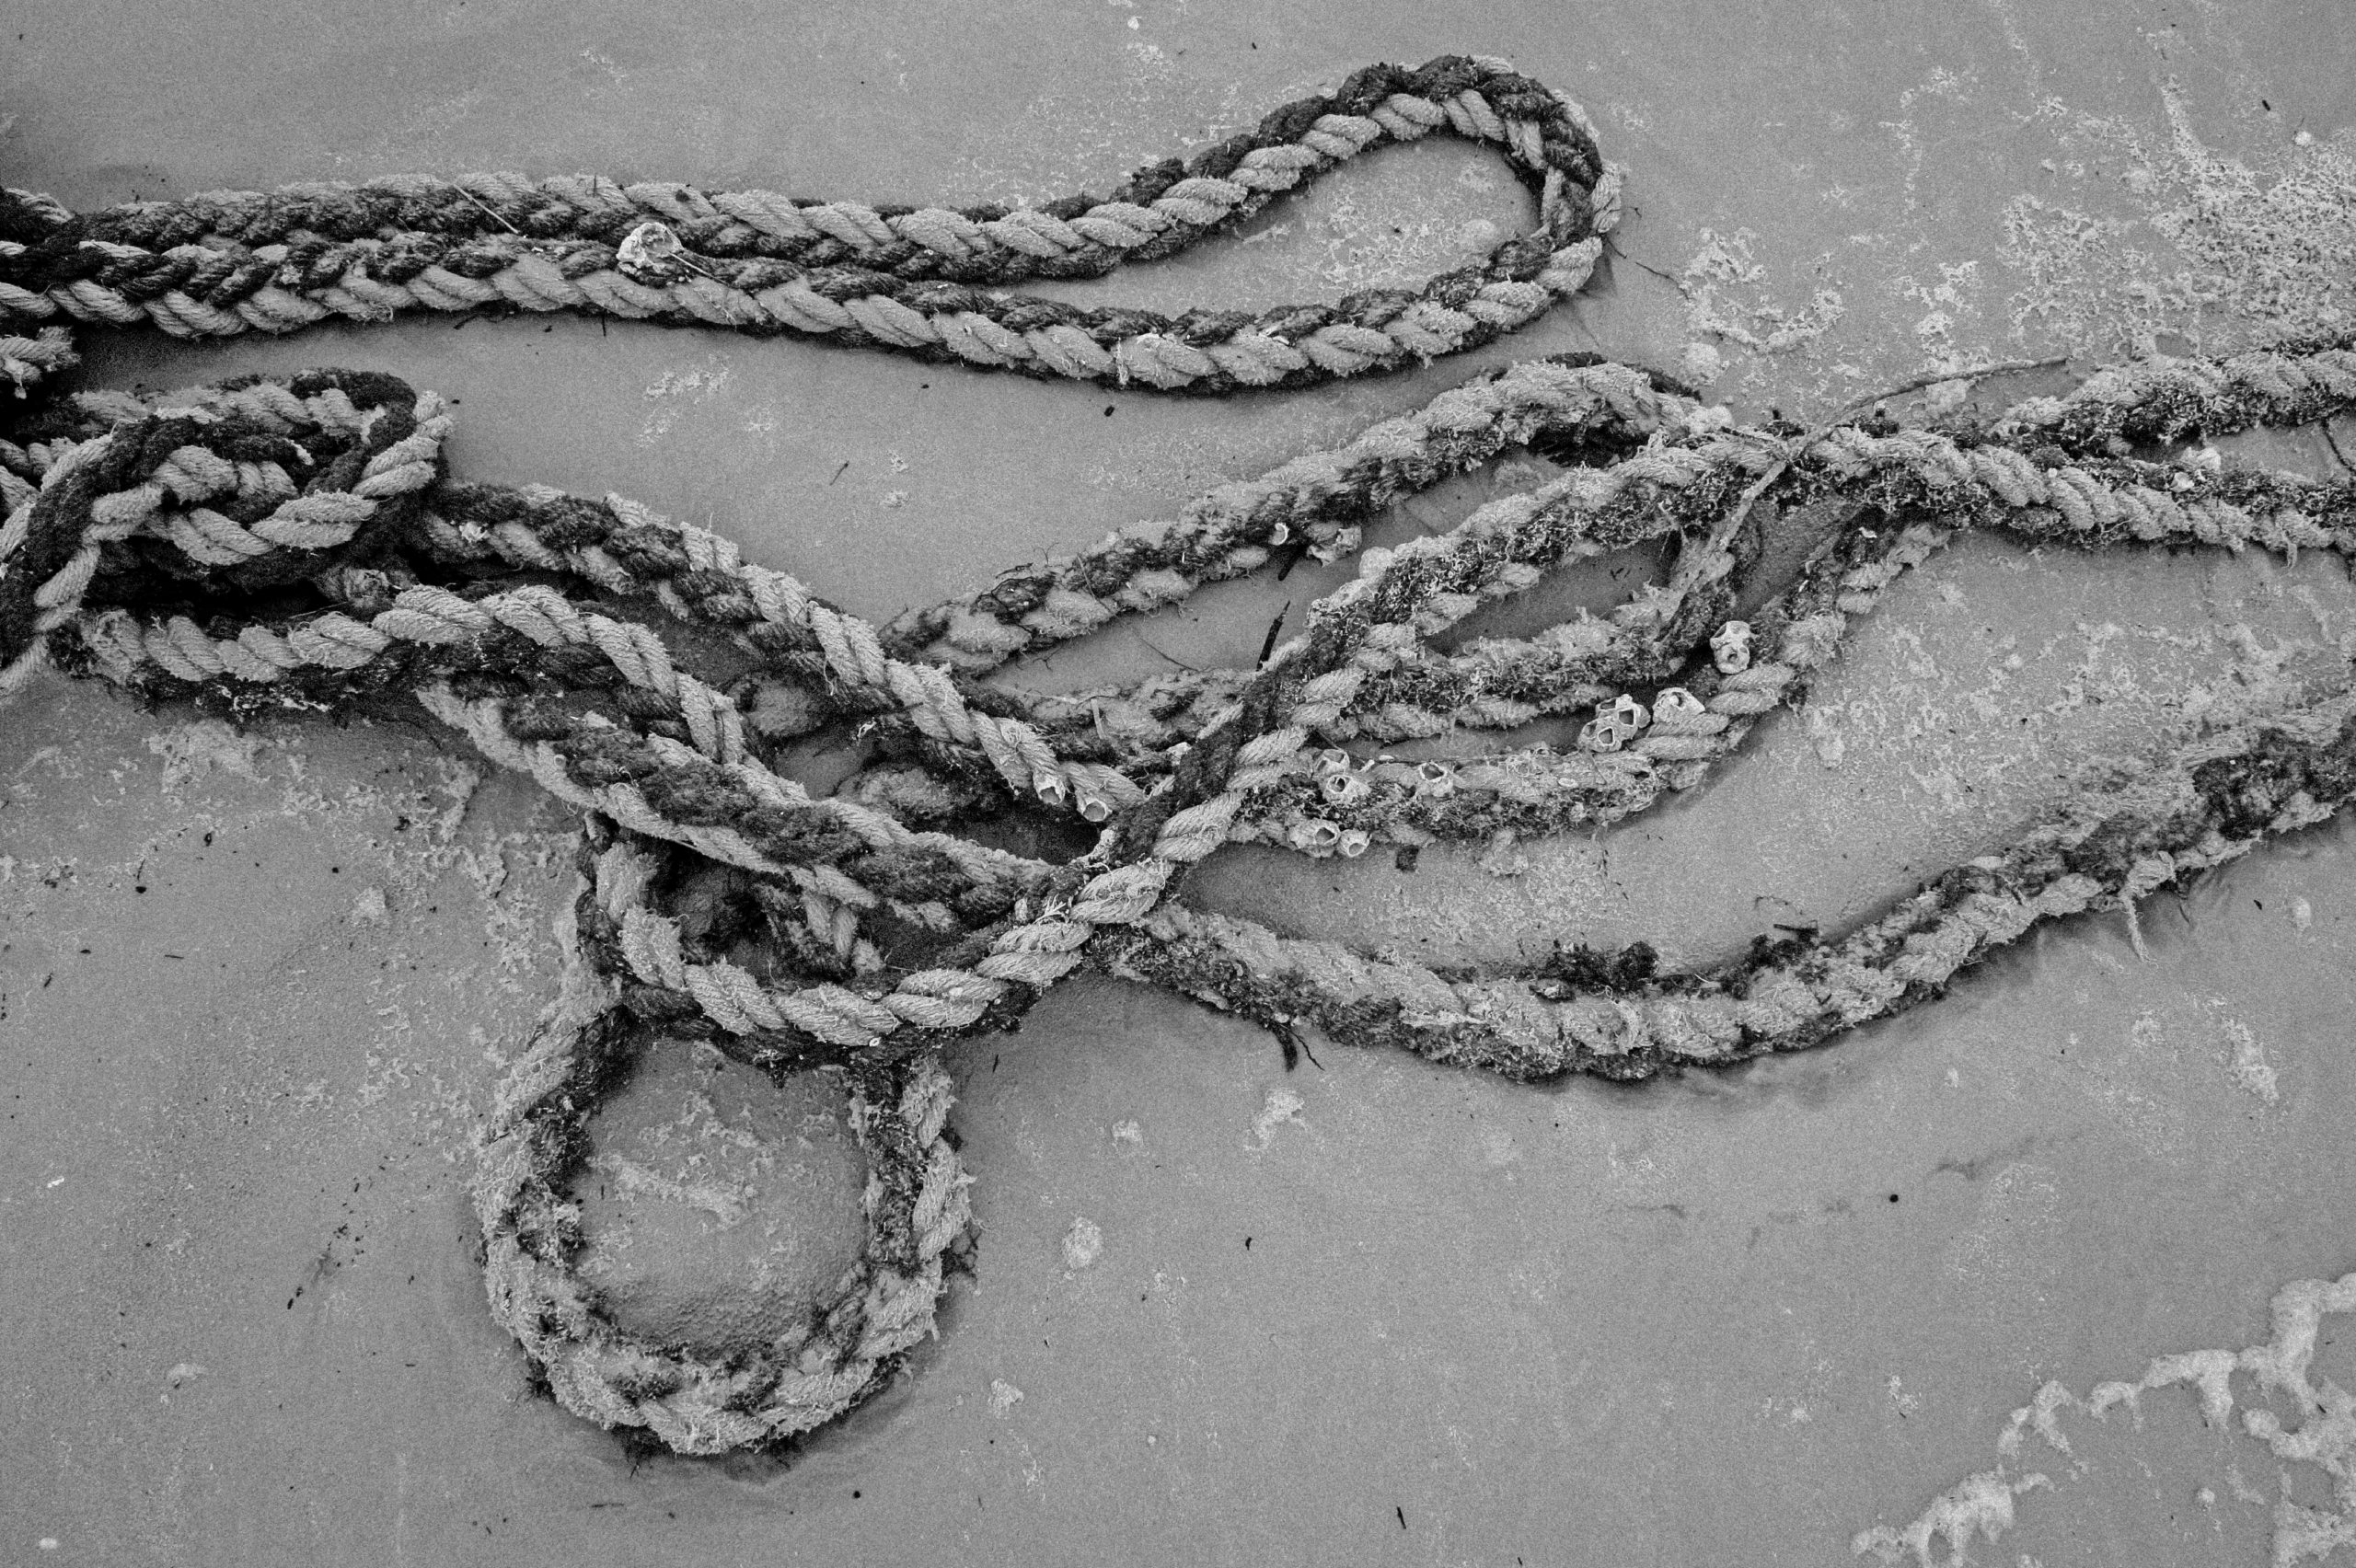 Ropes, twisted, laying on the sand